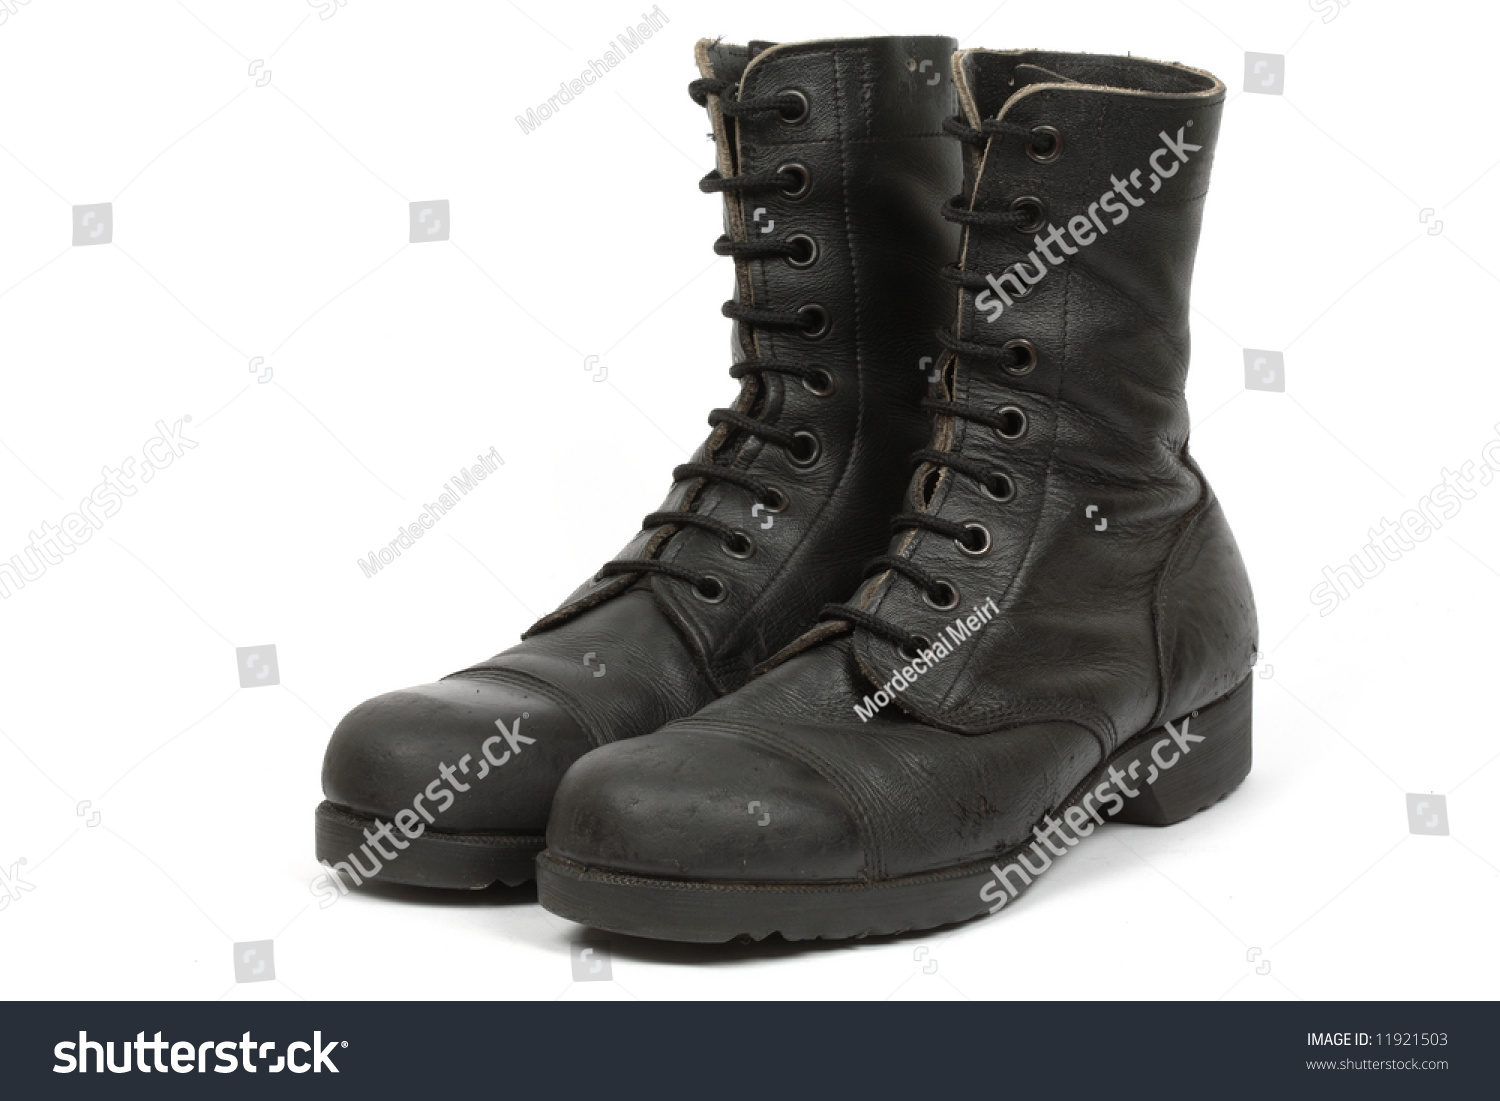 Israeli Army Boots Isolated Stock Photo 11921503 - Shutterstock